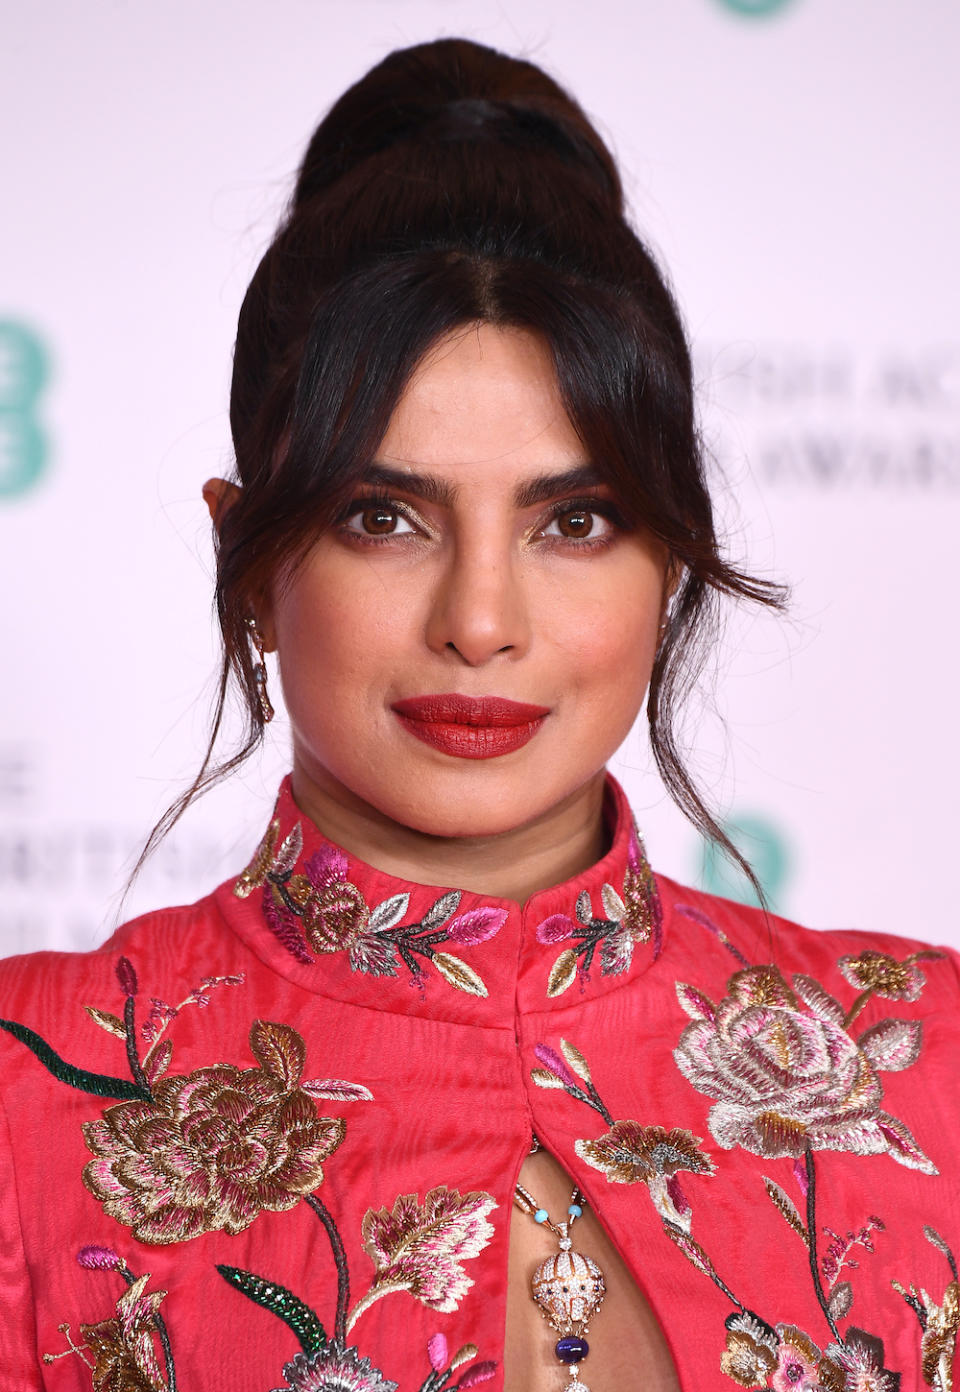 <p> Curtain bangs can be anything from almost a full fringe to a barely there, grown out style. Here actress Priyanka Chopra's are a little closer to the latter, but definitely feature that '70s "swooped" shape, which she paired with a bubble ponytail. </p>